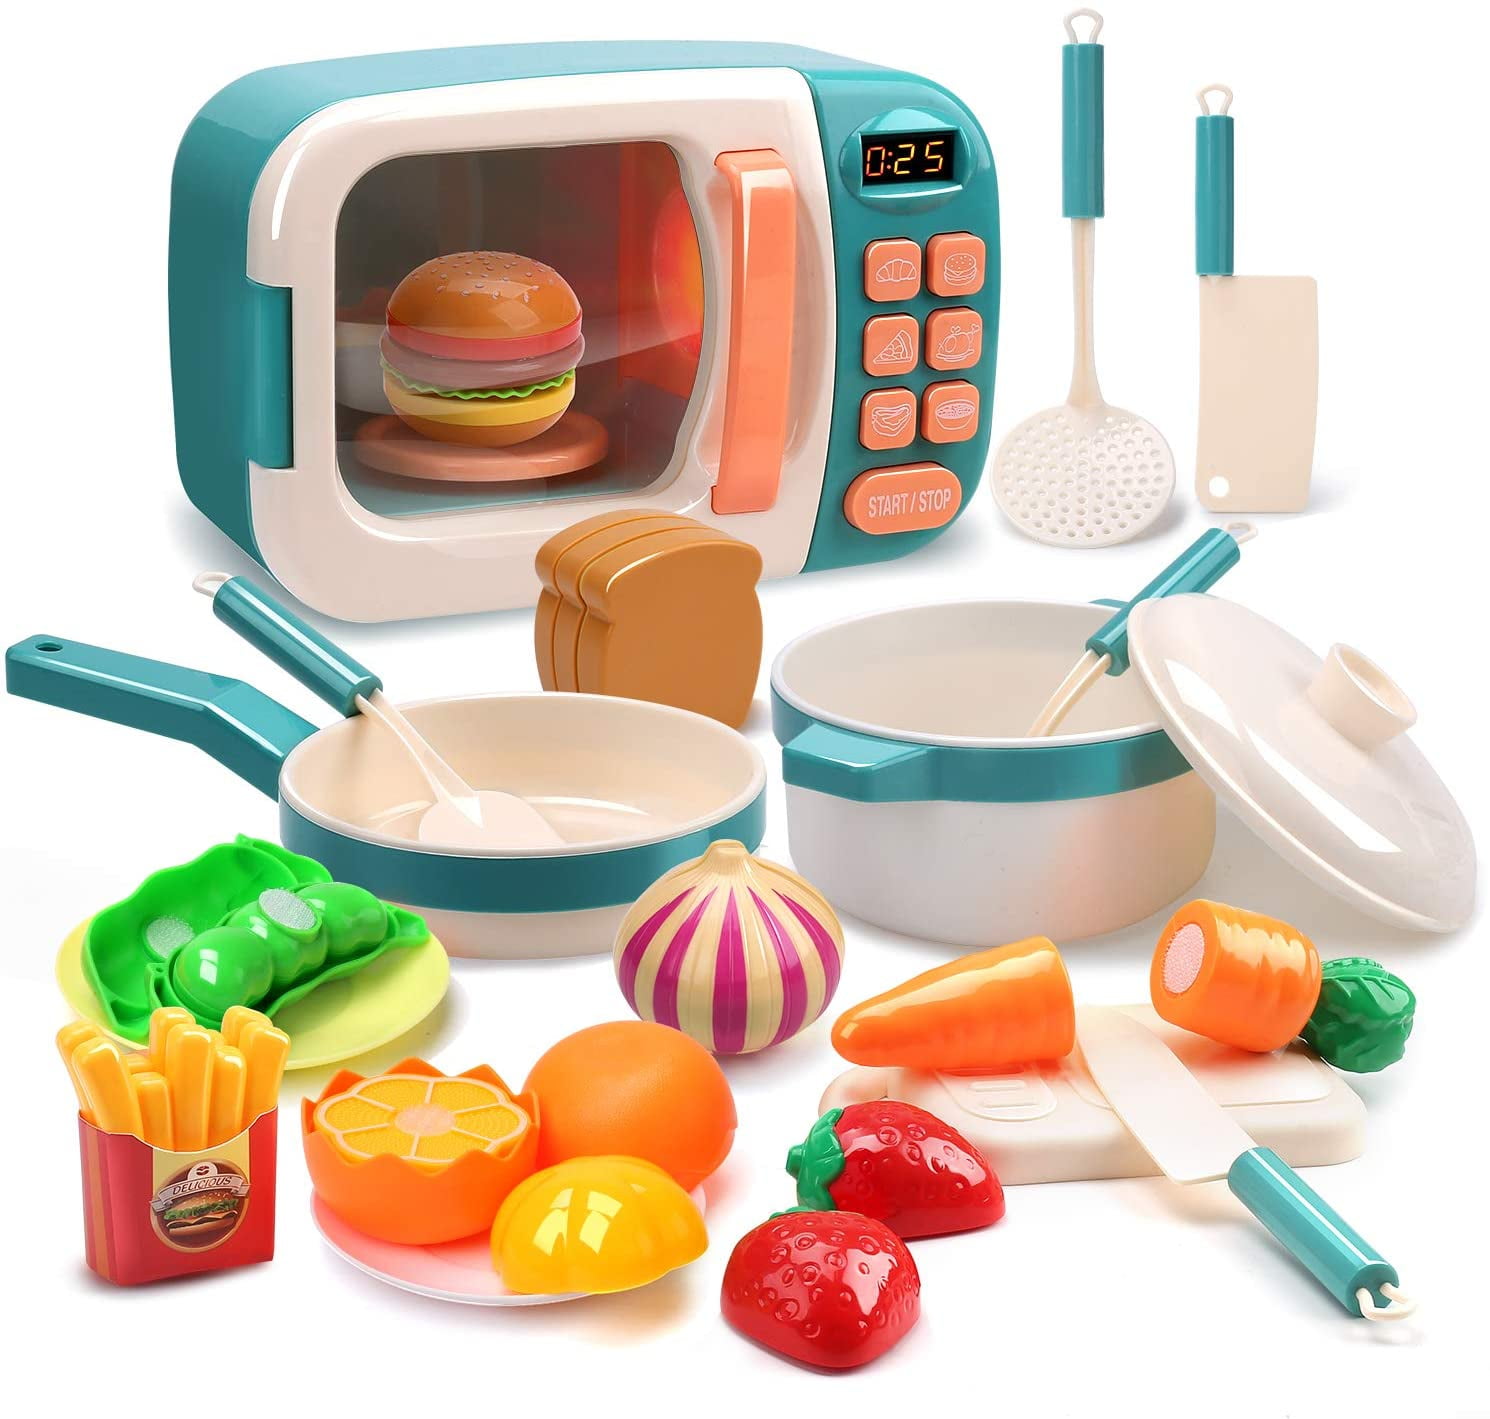 Boley Microwave Kitchen Play Set Kids Children With 10 Pcs Fake Food Included 